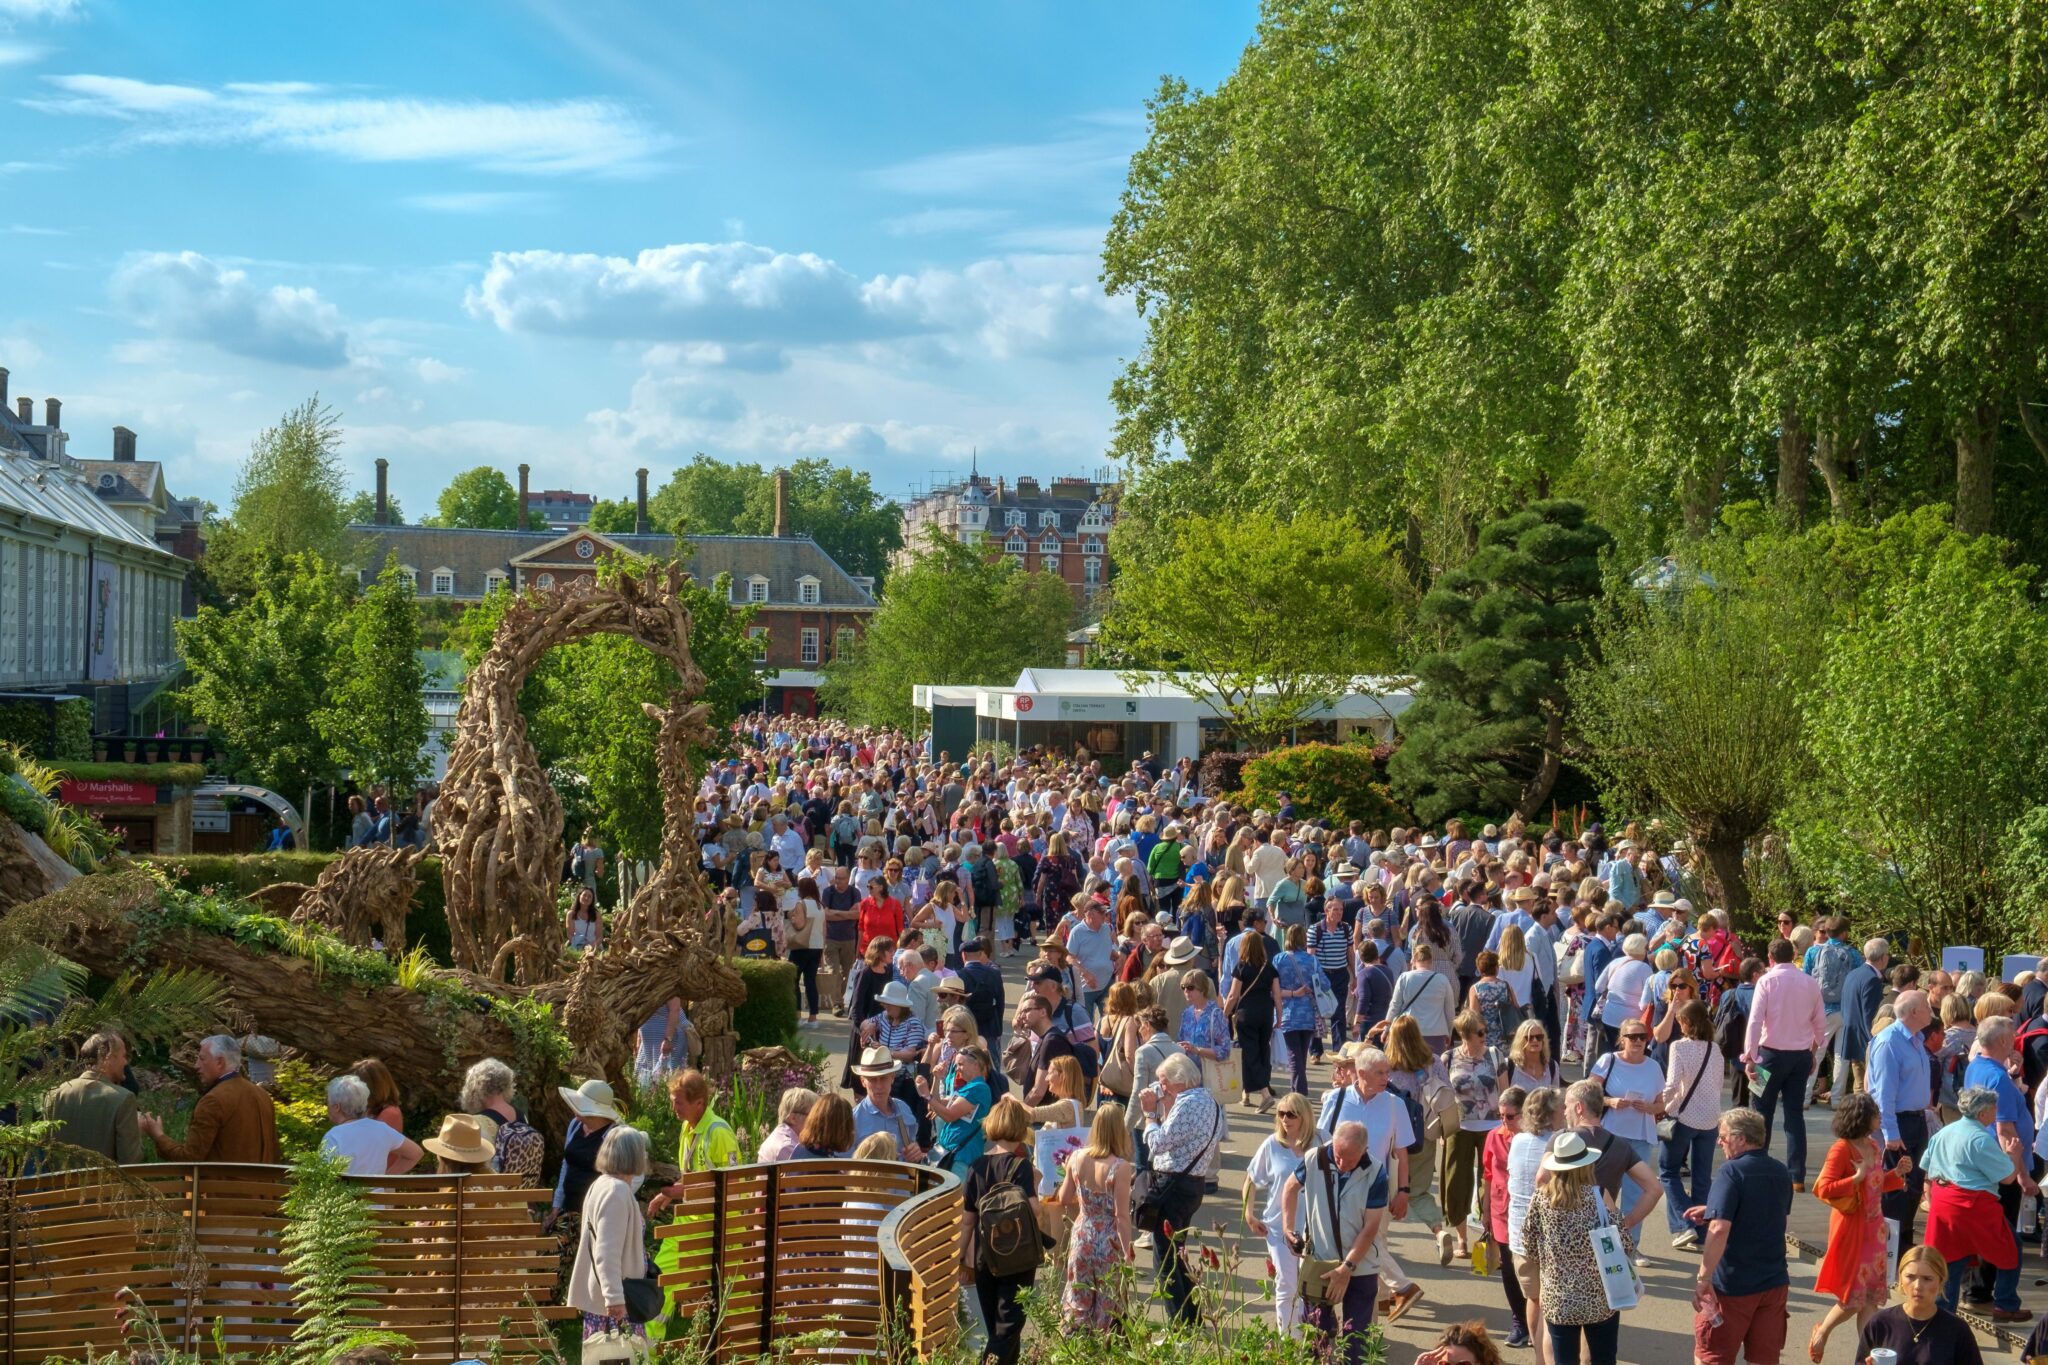 Guests gathering at Chelsea Flower Show